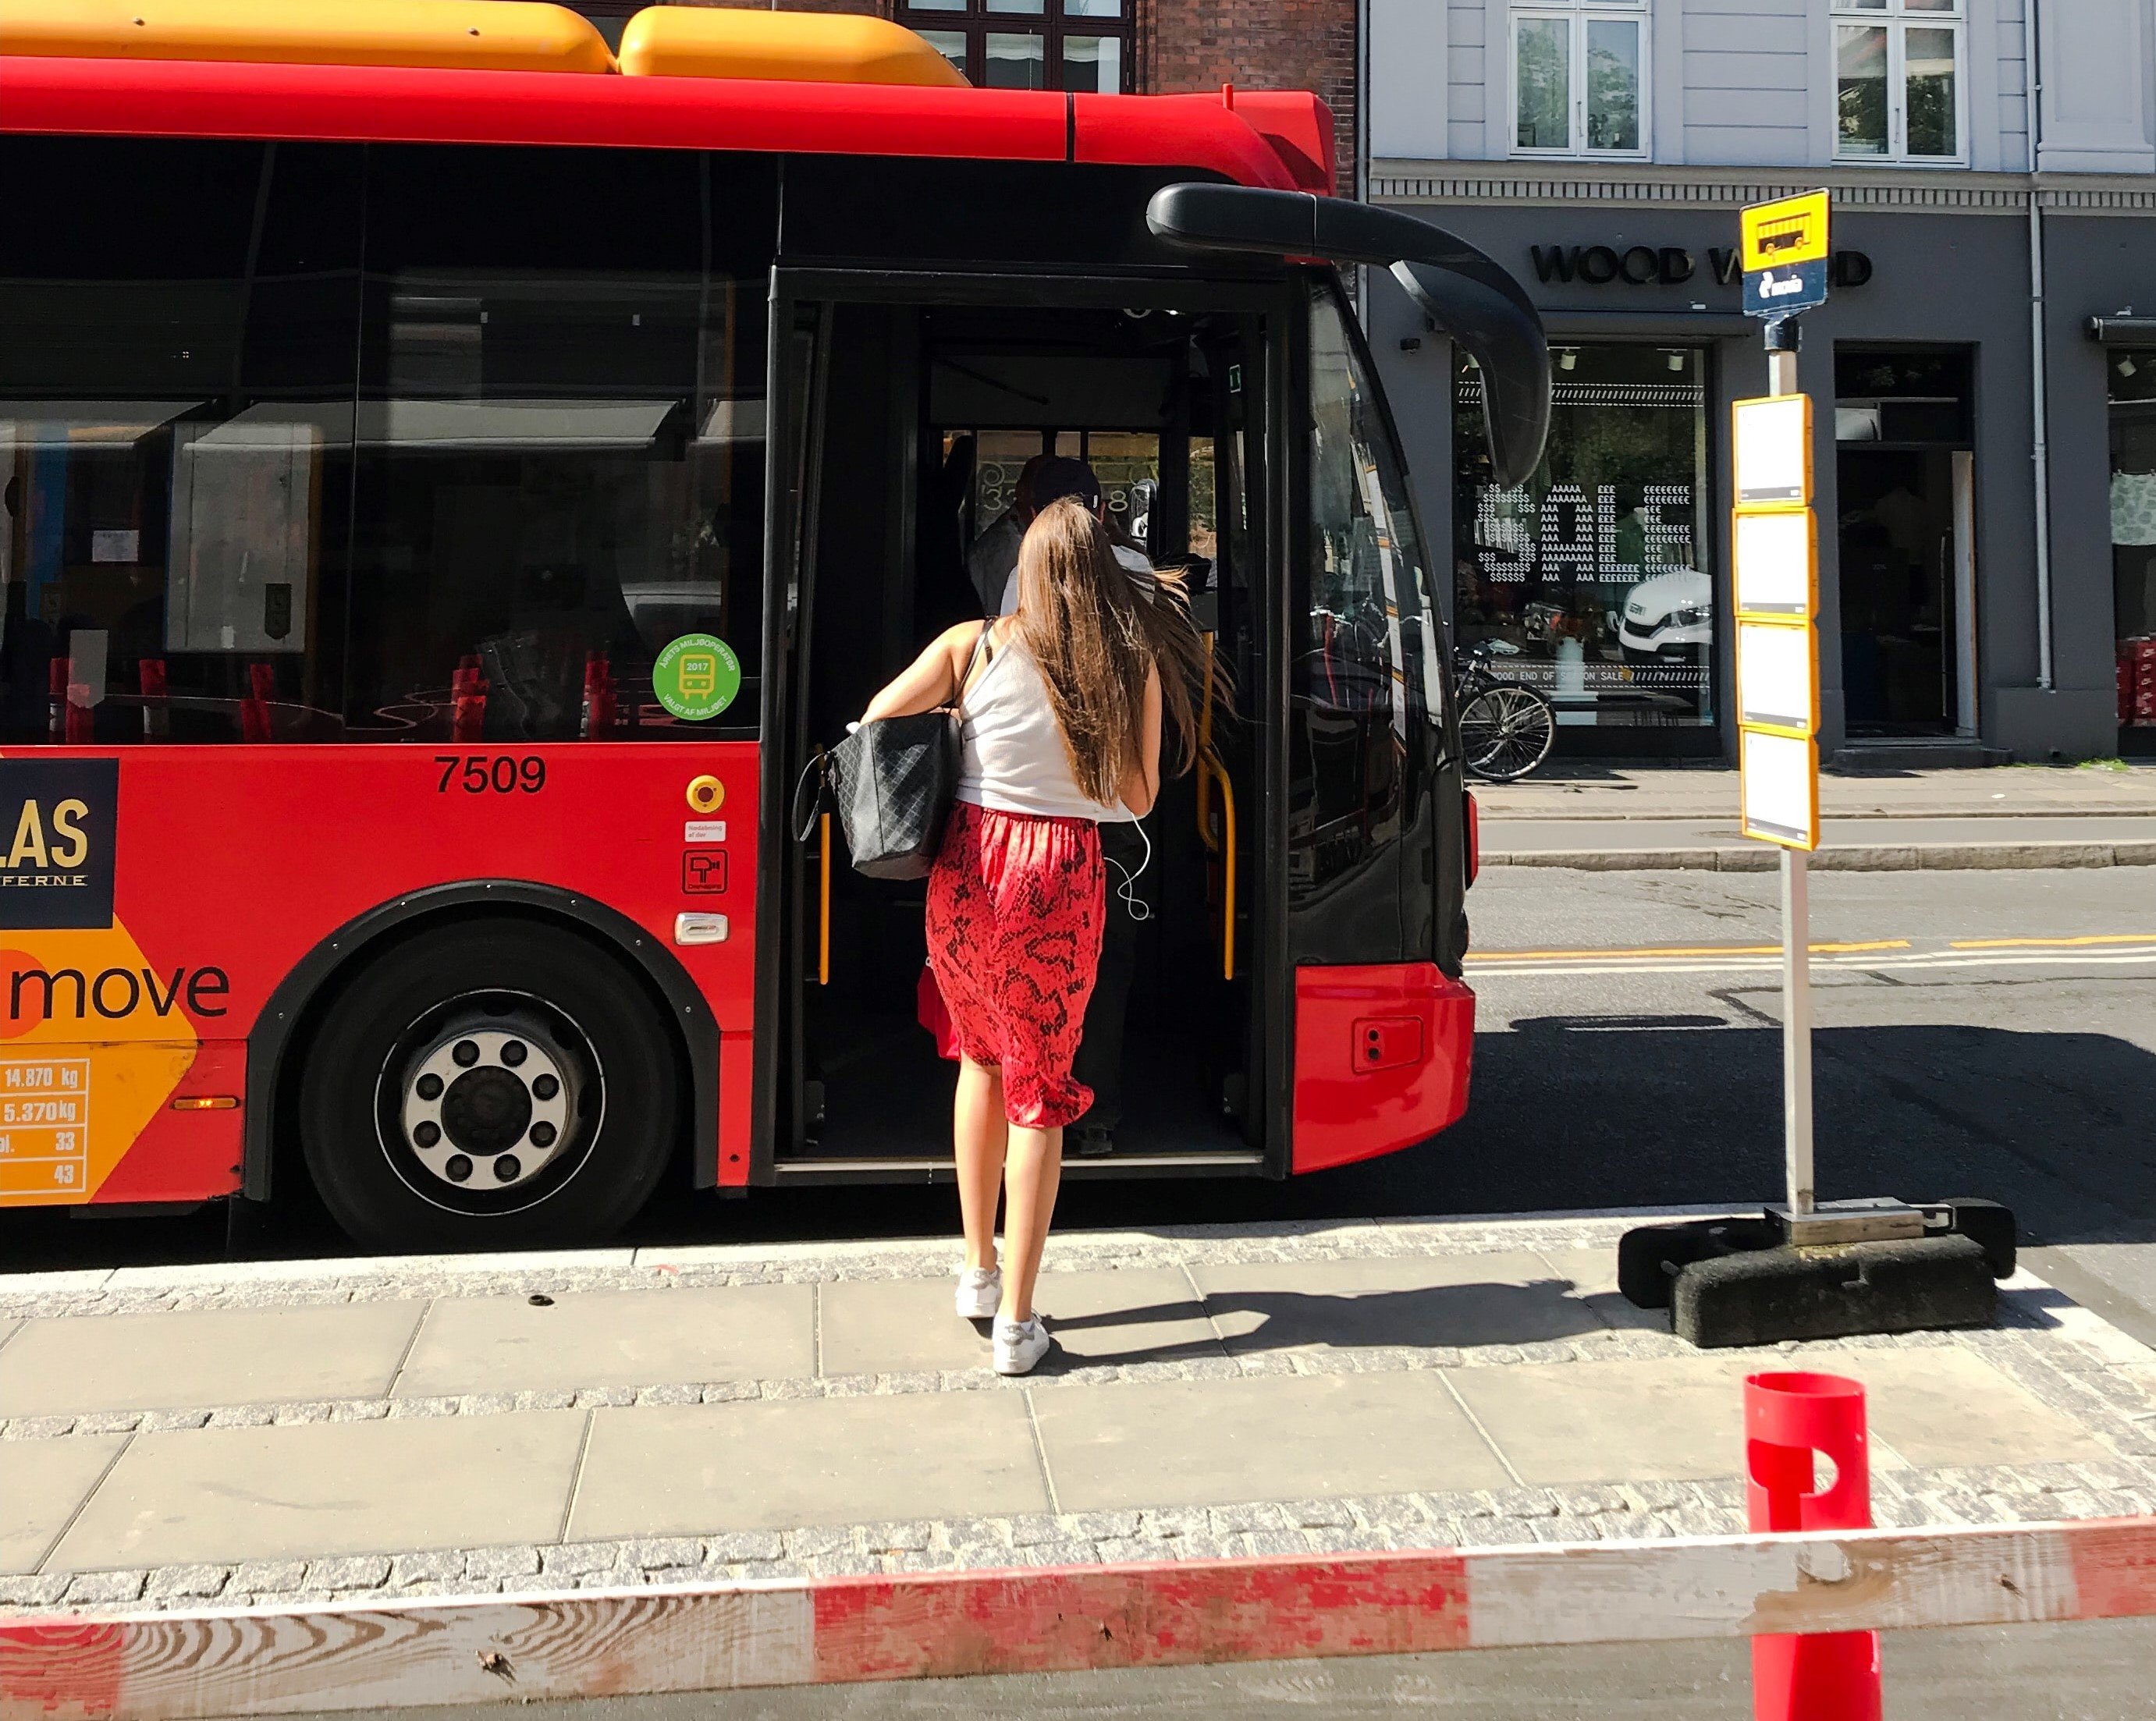 OP took the wrong bus without double-checking its destination | Photo: Unsplash